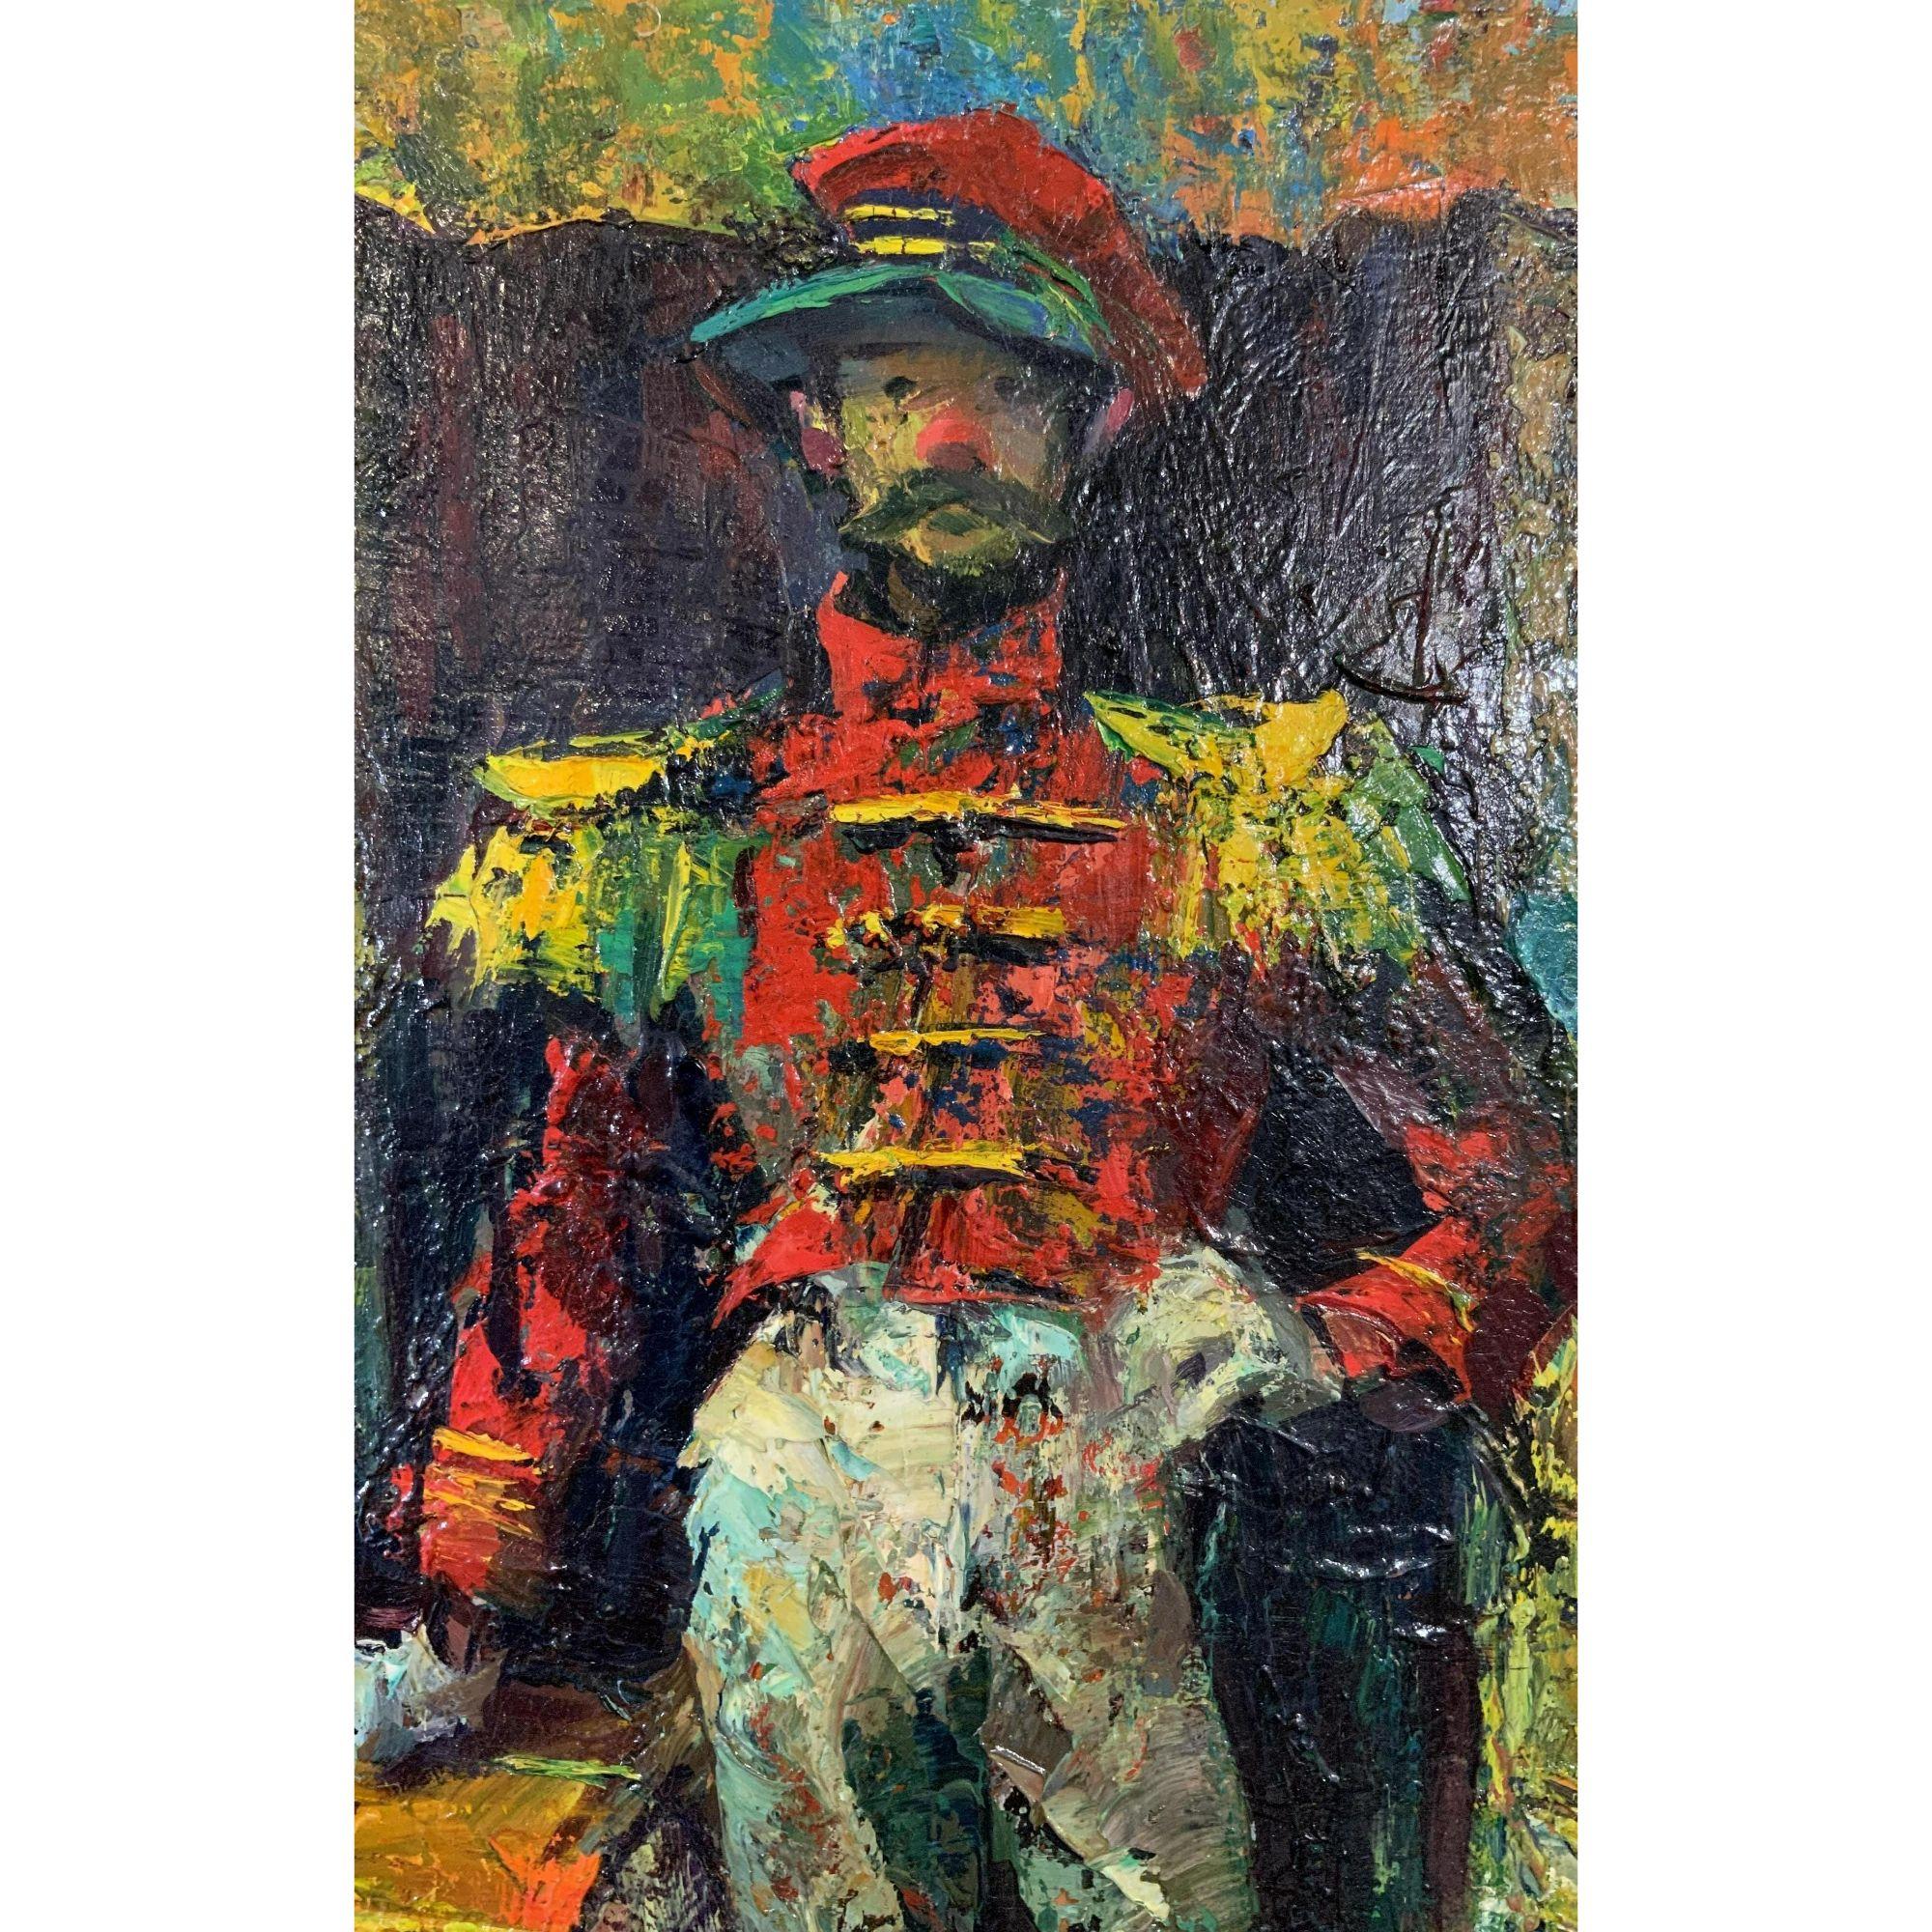 Vintage Mid-Century Modern Iver Rose Oil Painting of a Clown Soldier In Good Condition For Sale In LOS ANGELES, CA